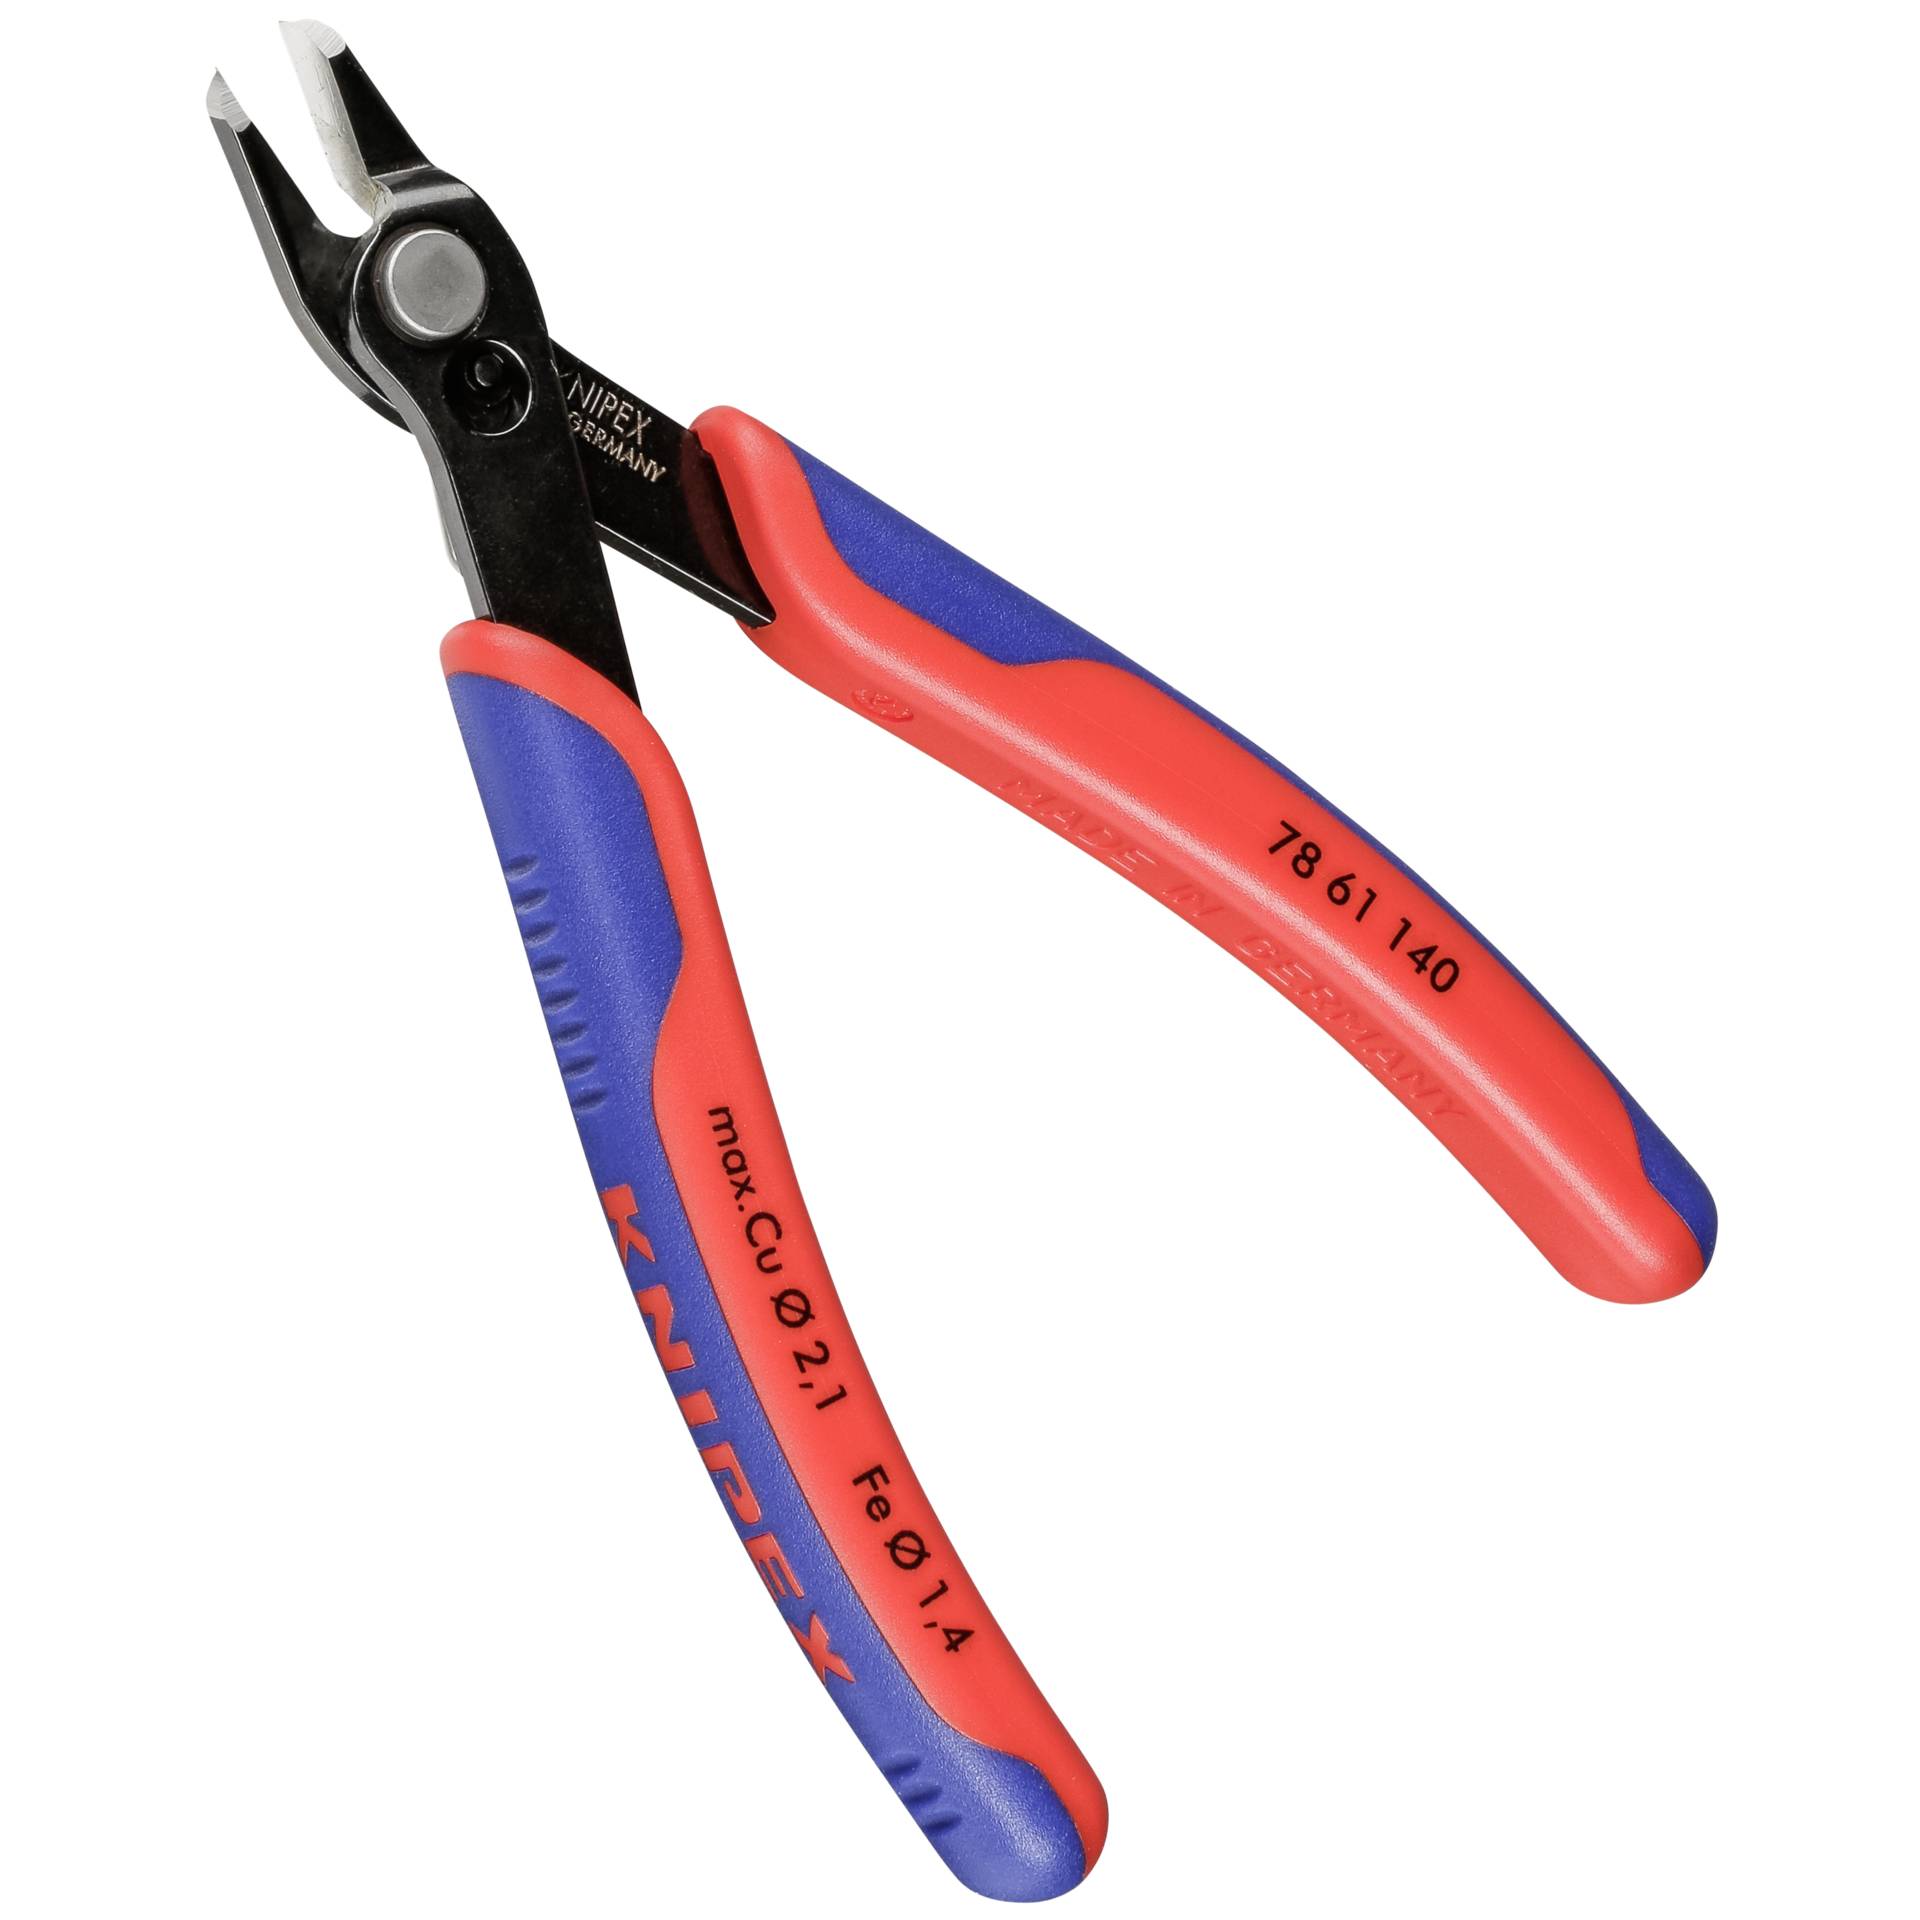 KNIPEX Electronic Super Knips XL brunito 140 mm